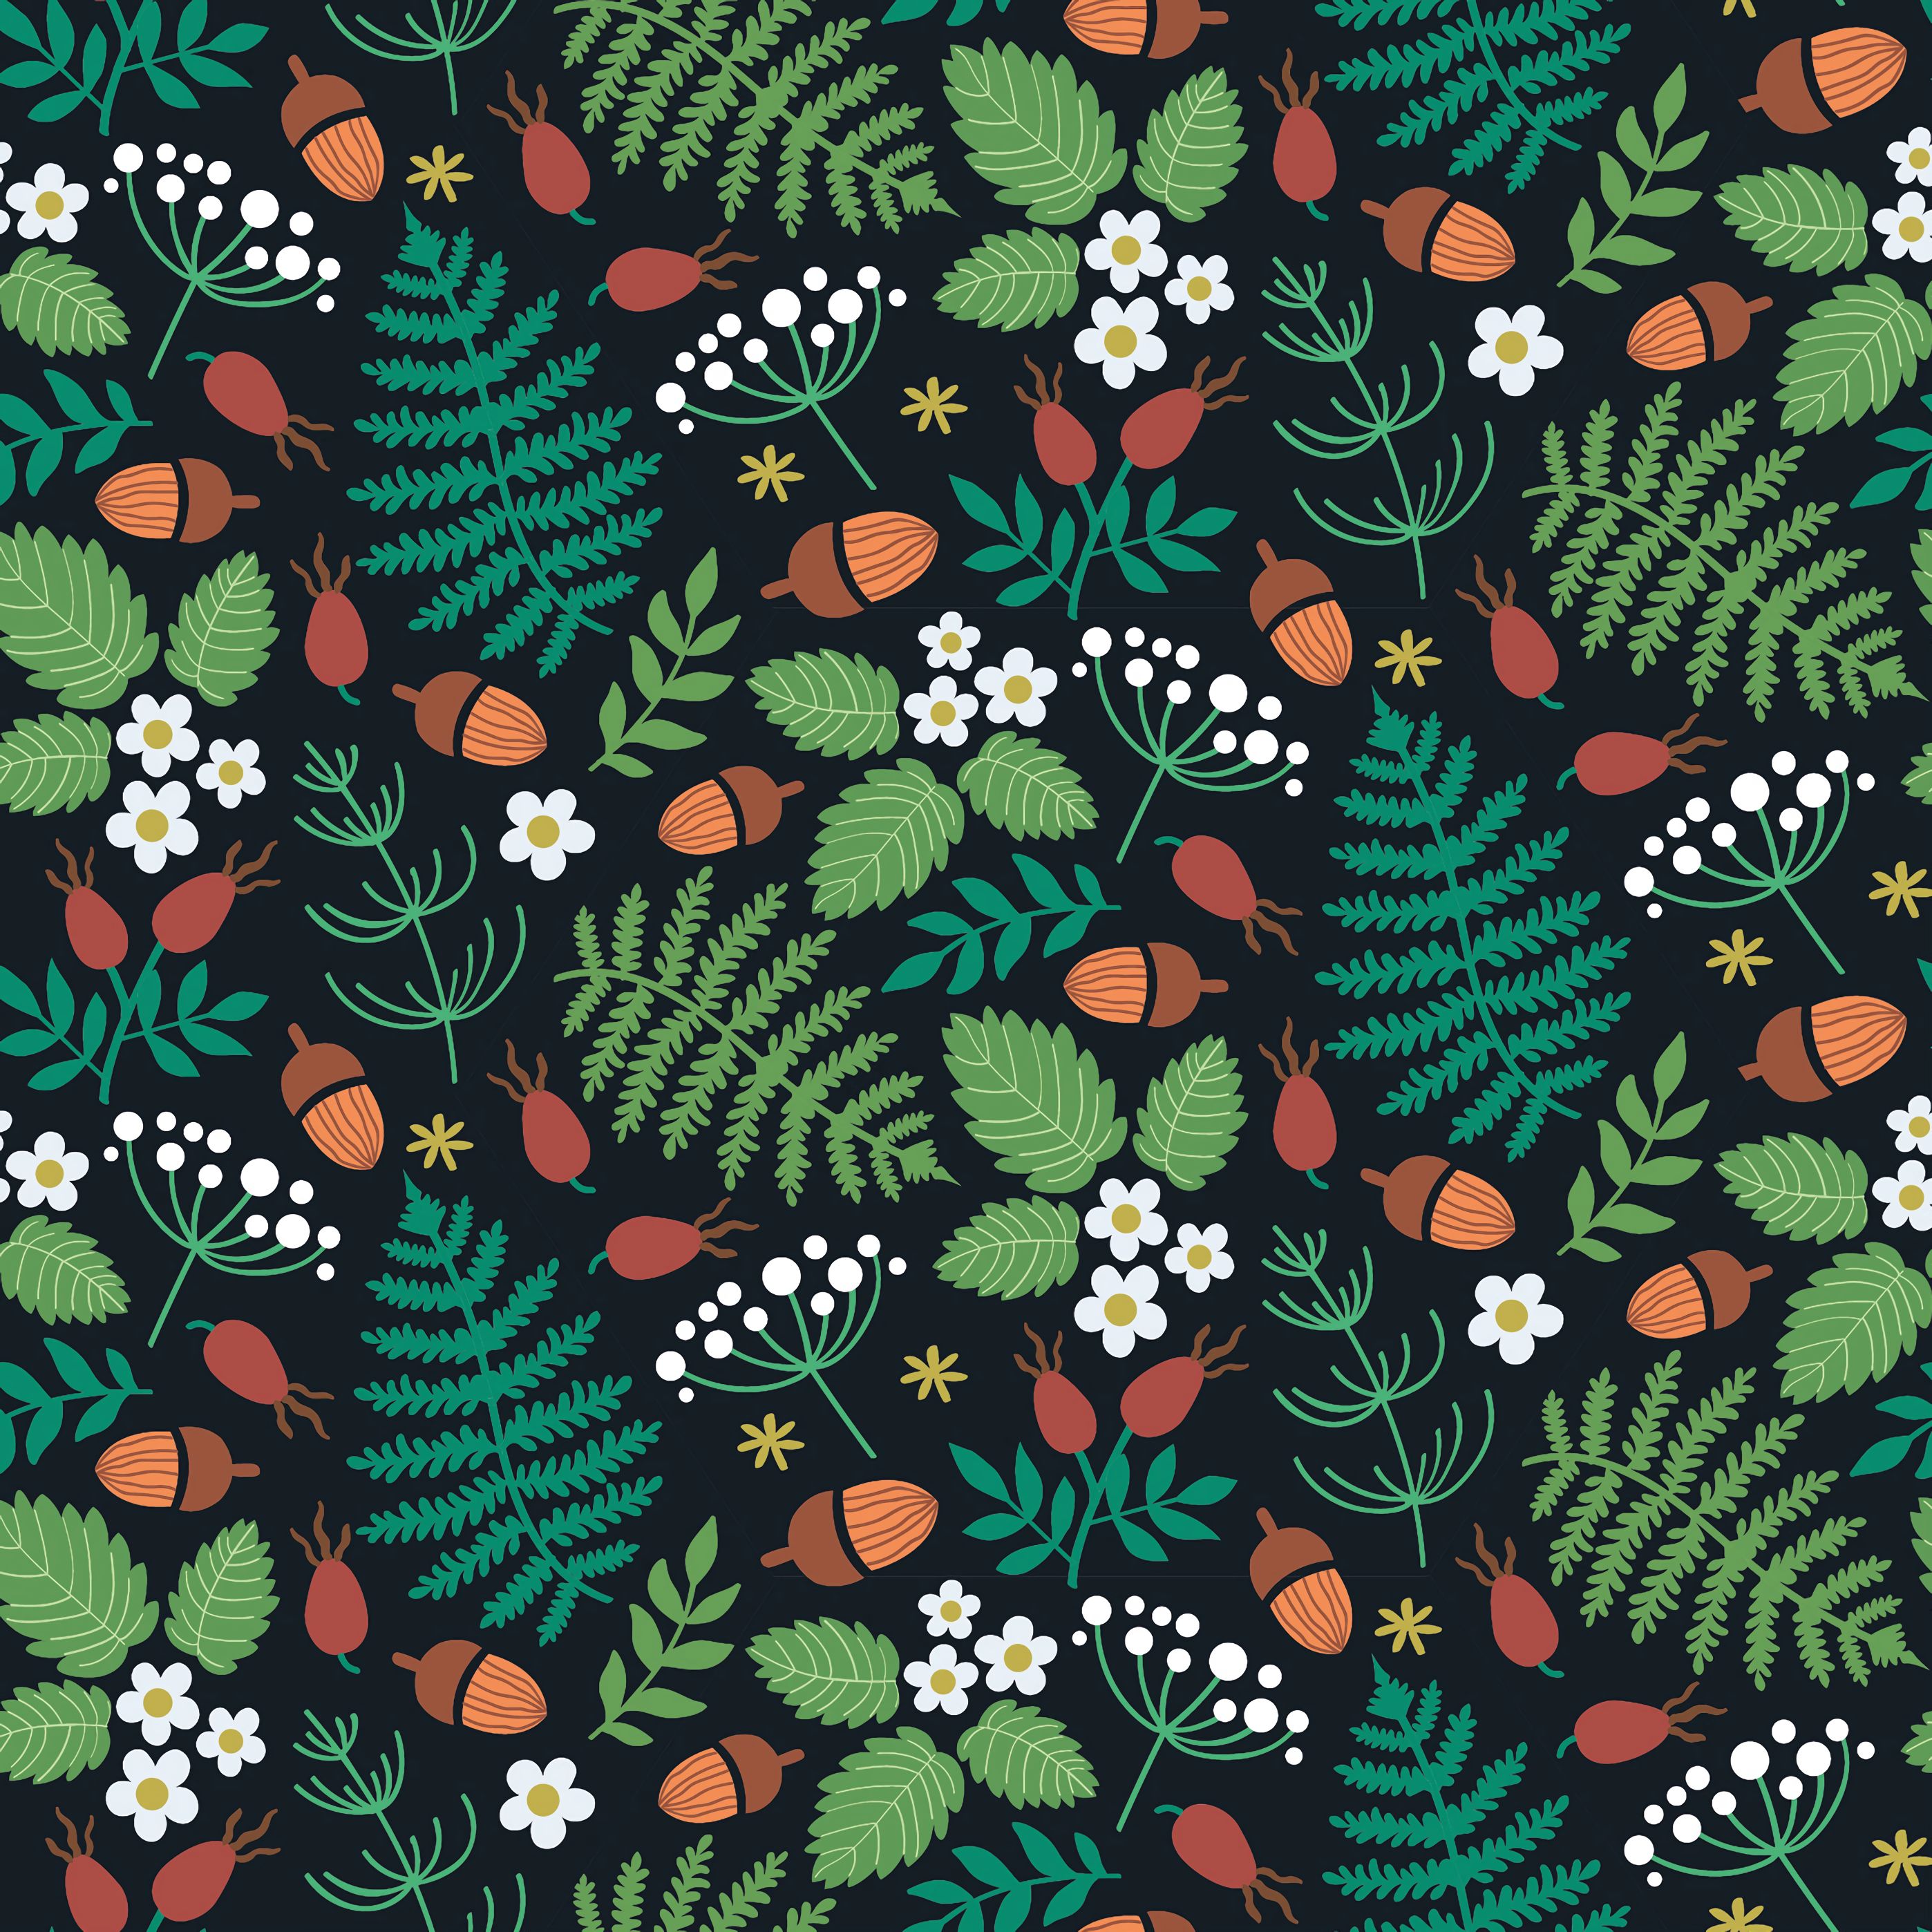 texture, textures, forest, pattern, leaves, strawberry, berries, acorns, wild strawberries, motive Phone Background